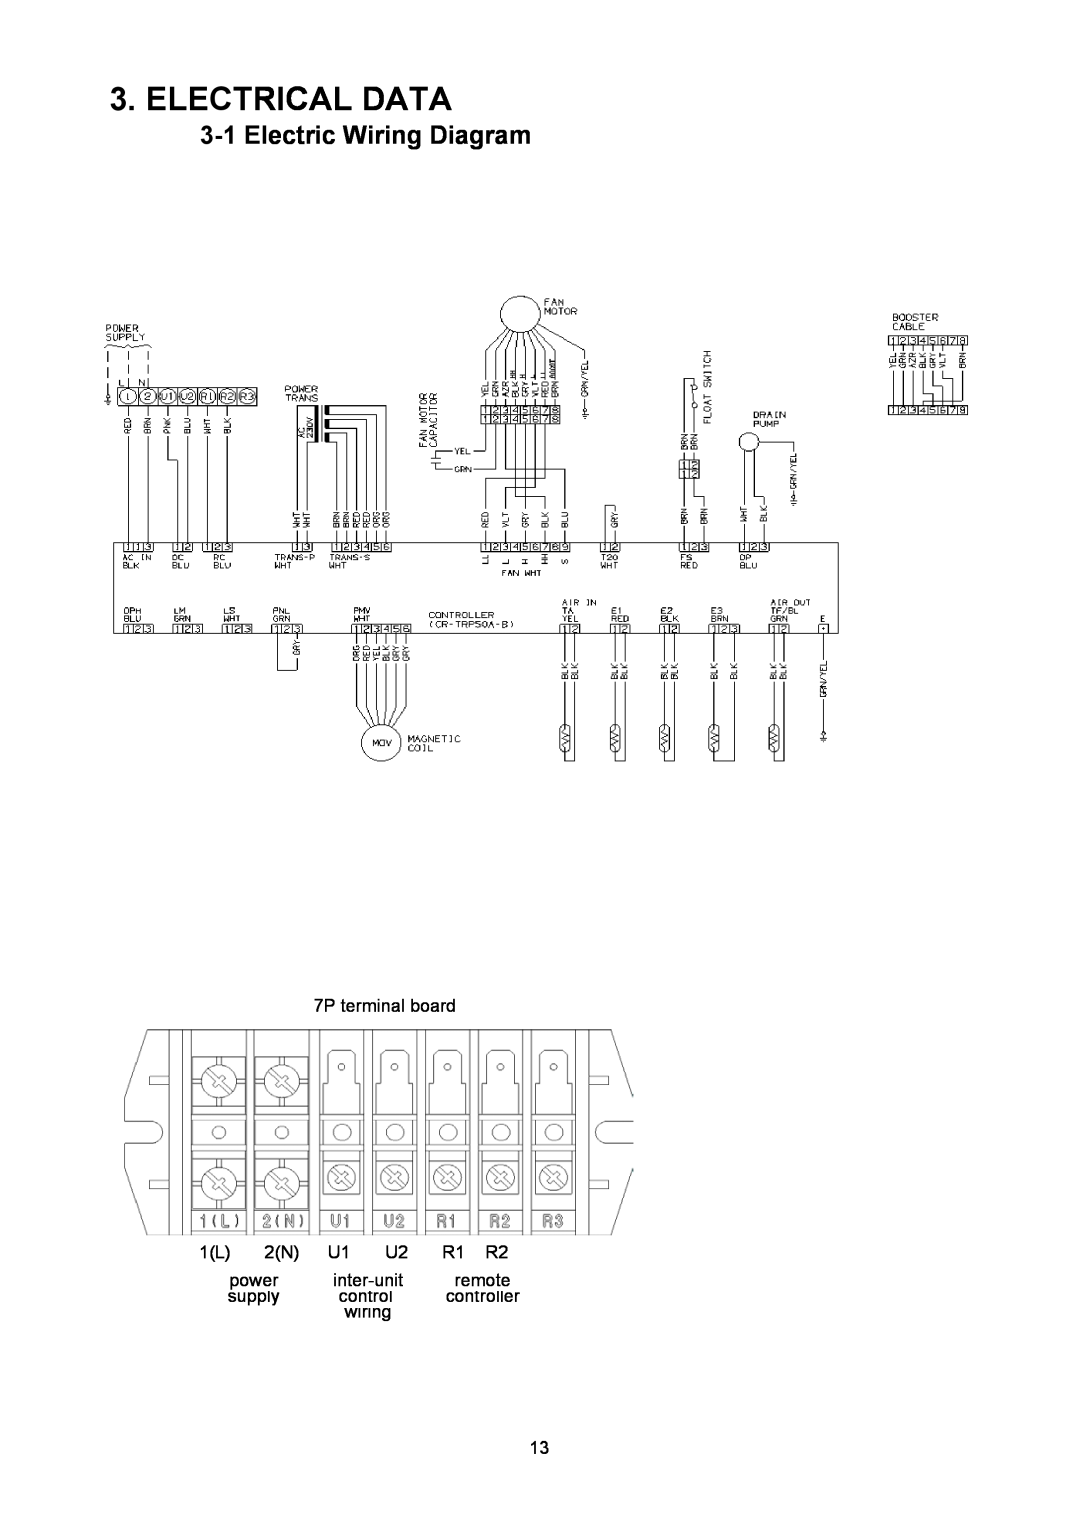 Sanyo SPW-UMR94EXH56, SPW-UMR184EXH56, SPW-UMR124EXH56, SPW-UMR164EXH56 Electrical Data, 3-1Electric Wiring Diagram 